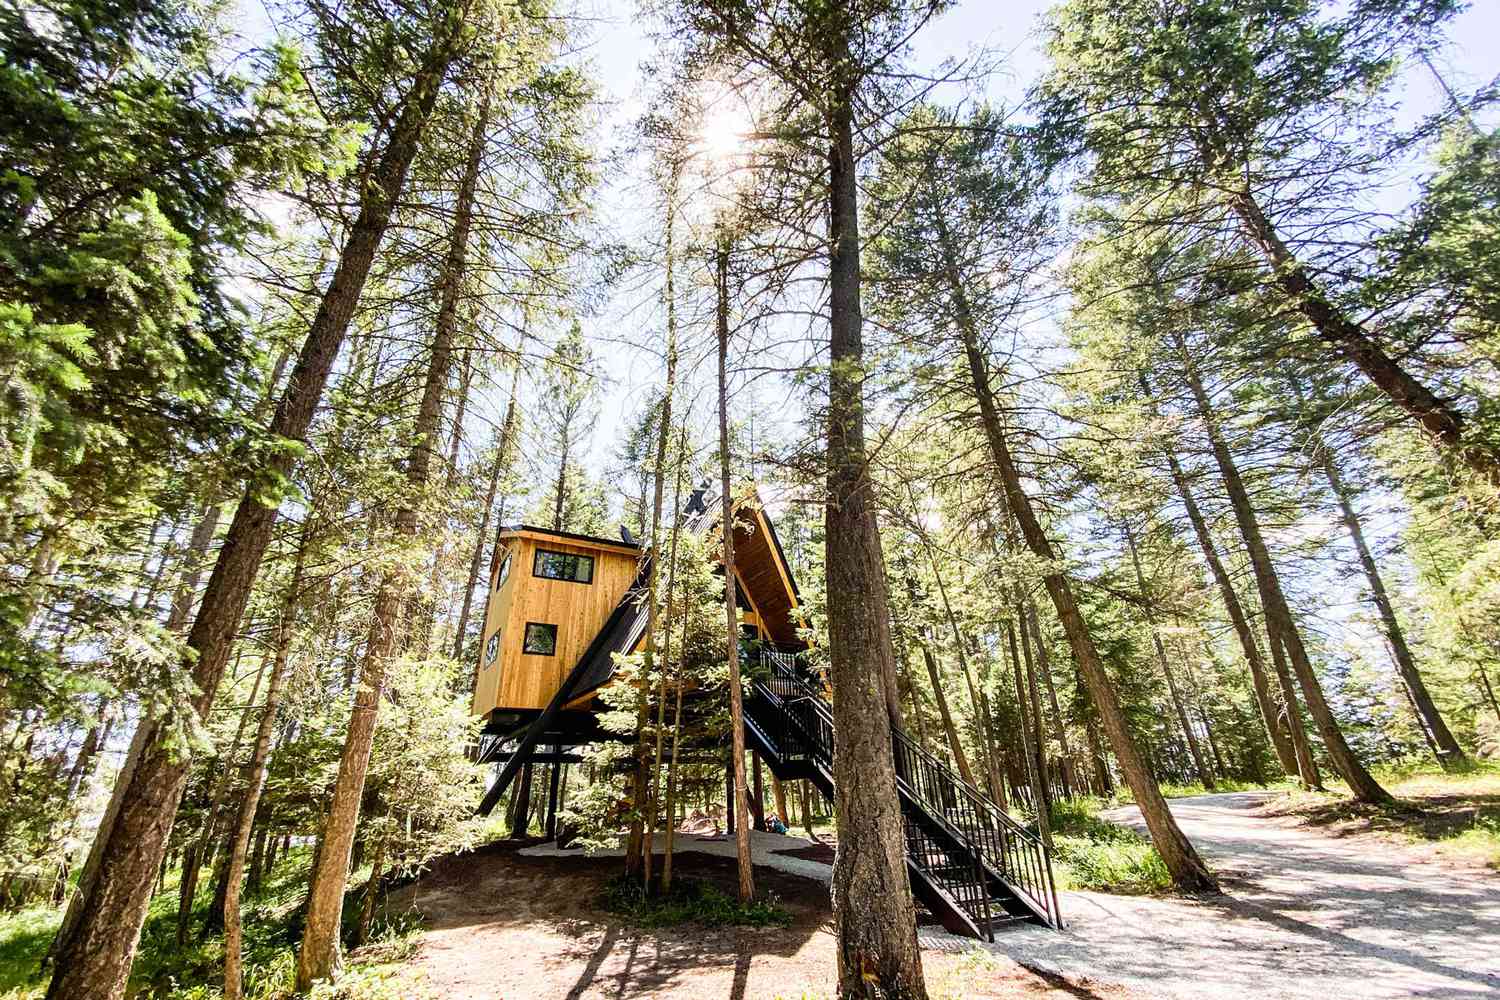 10 Amazing Airbnb Rentals Near National Parks